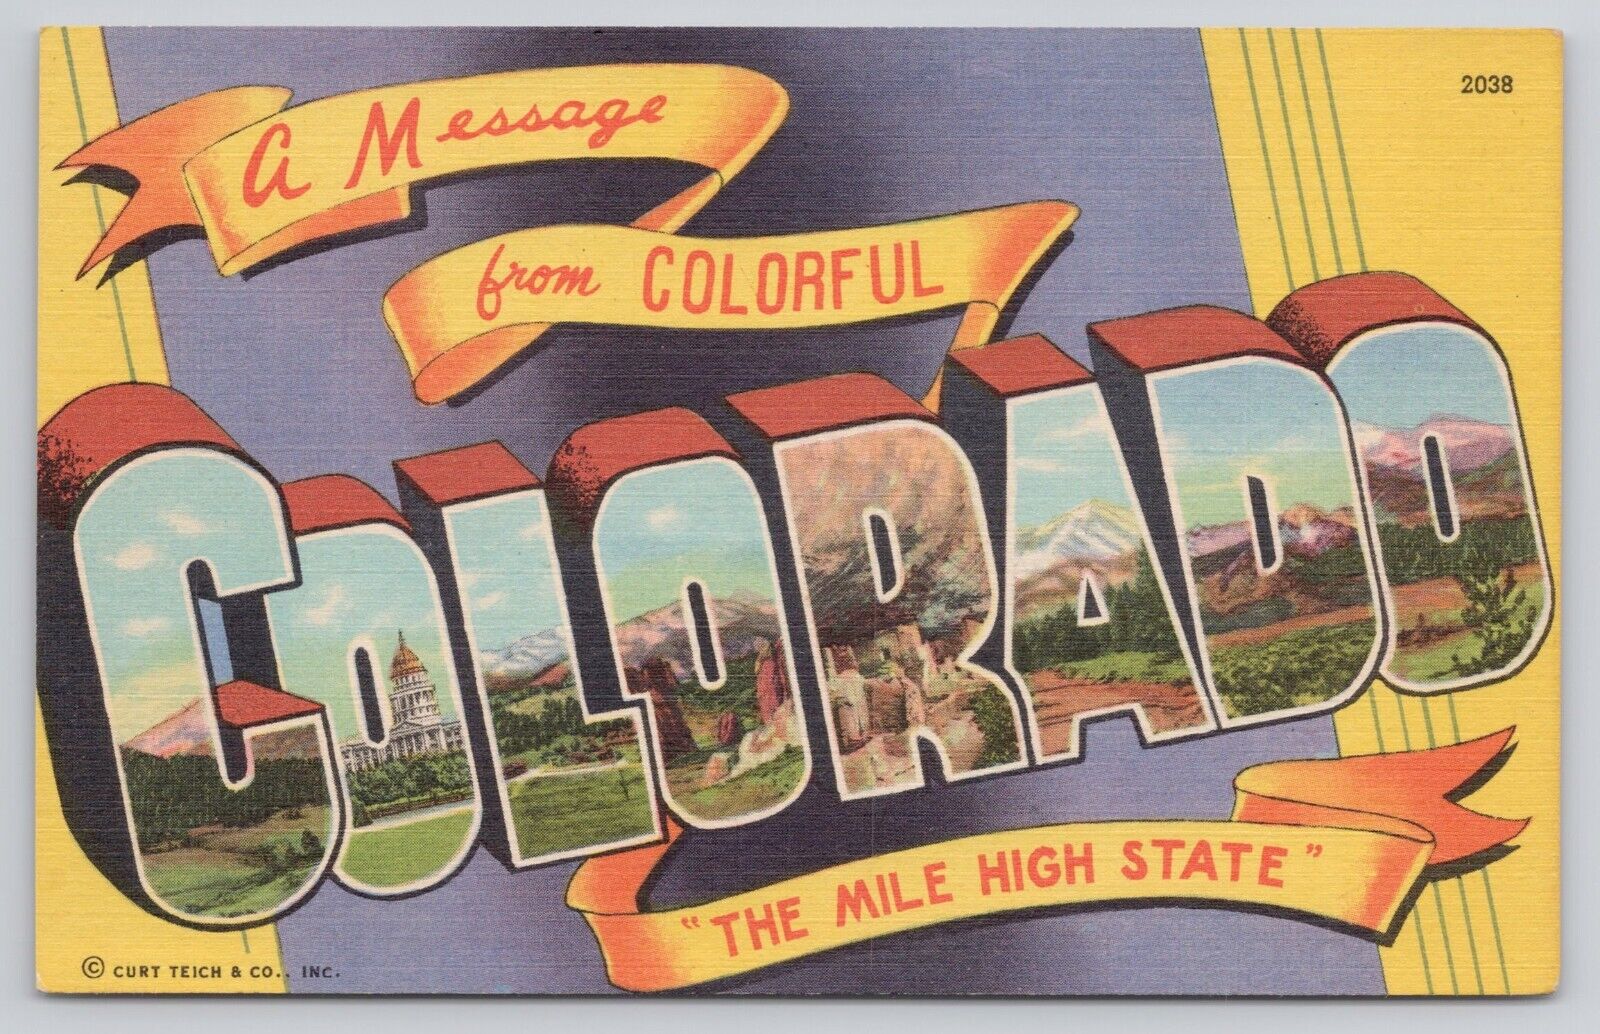 Greetings from Colorful Colorado Mile High State Large Letters Vintage Postcard